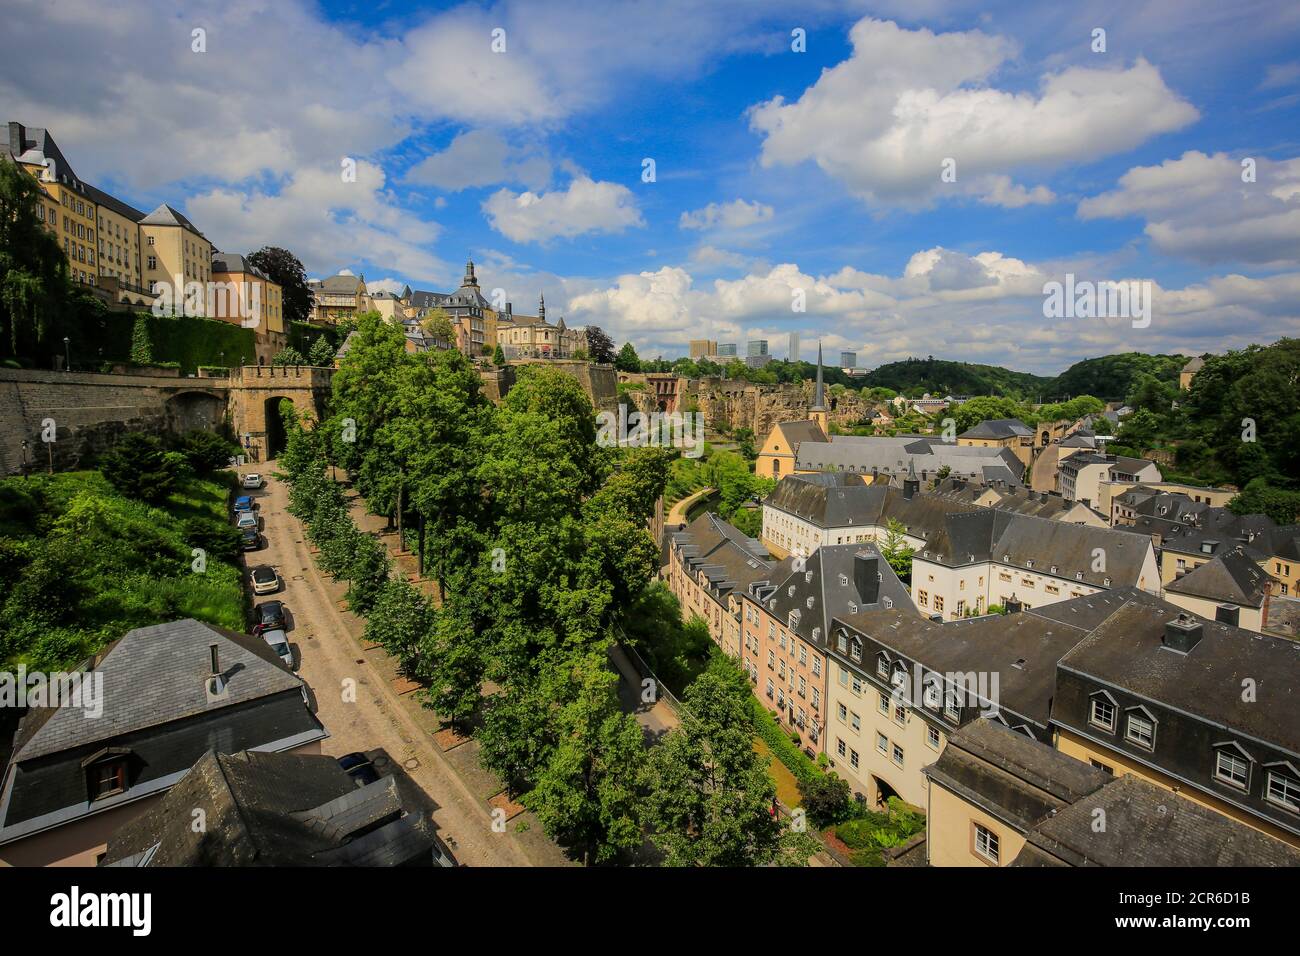 Lower town of Grund, Luxembourg City, Grand Duchy of Luxembourg, Europe Stock Photo